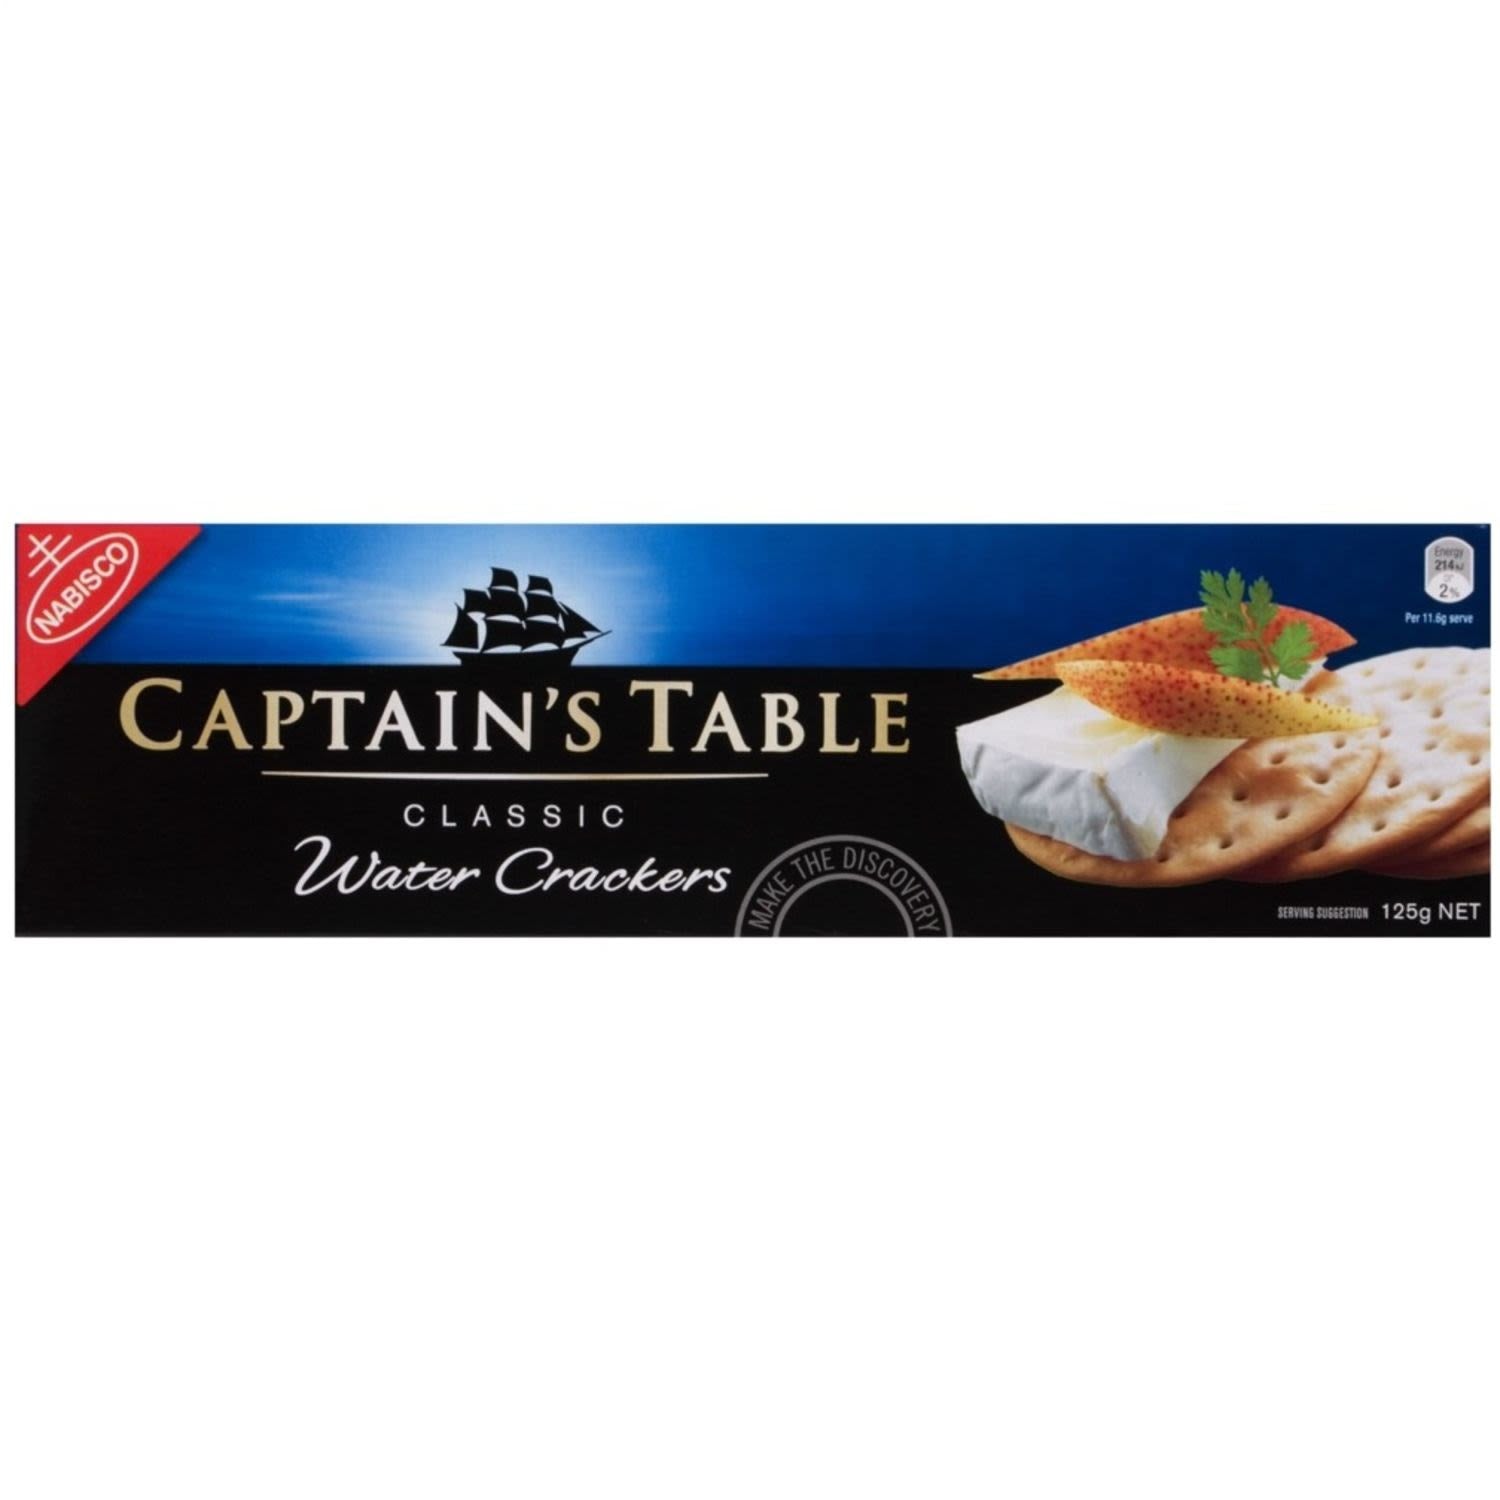 Captains's Original Table Water Crackers 125g